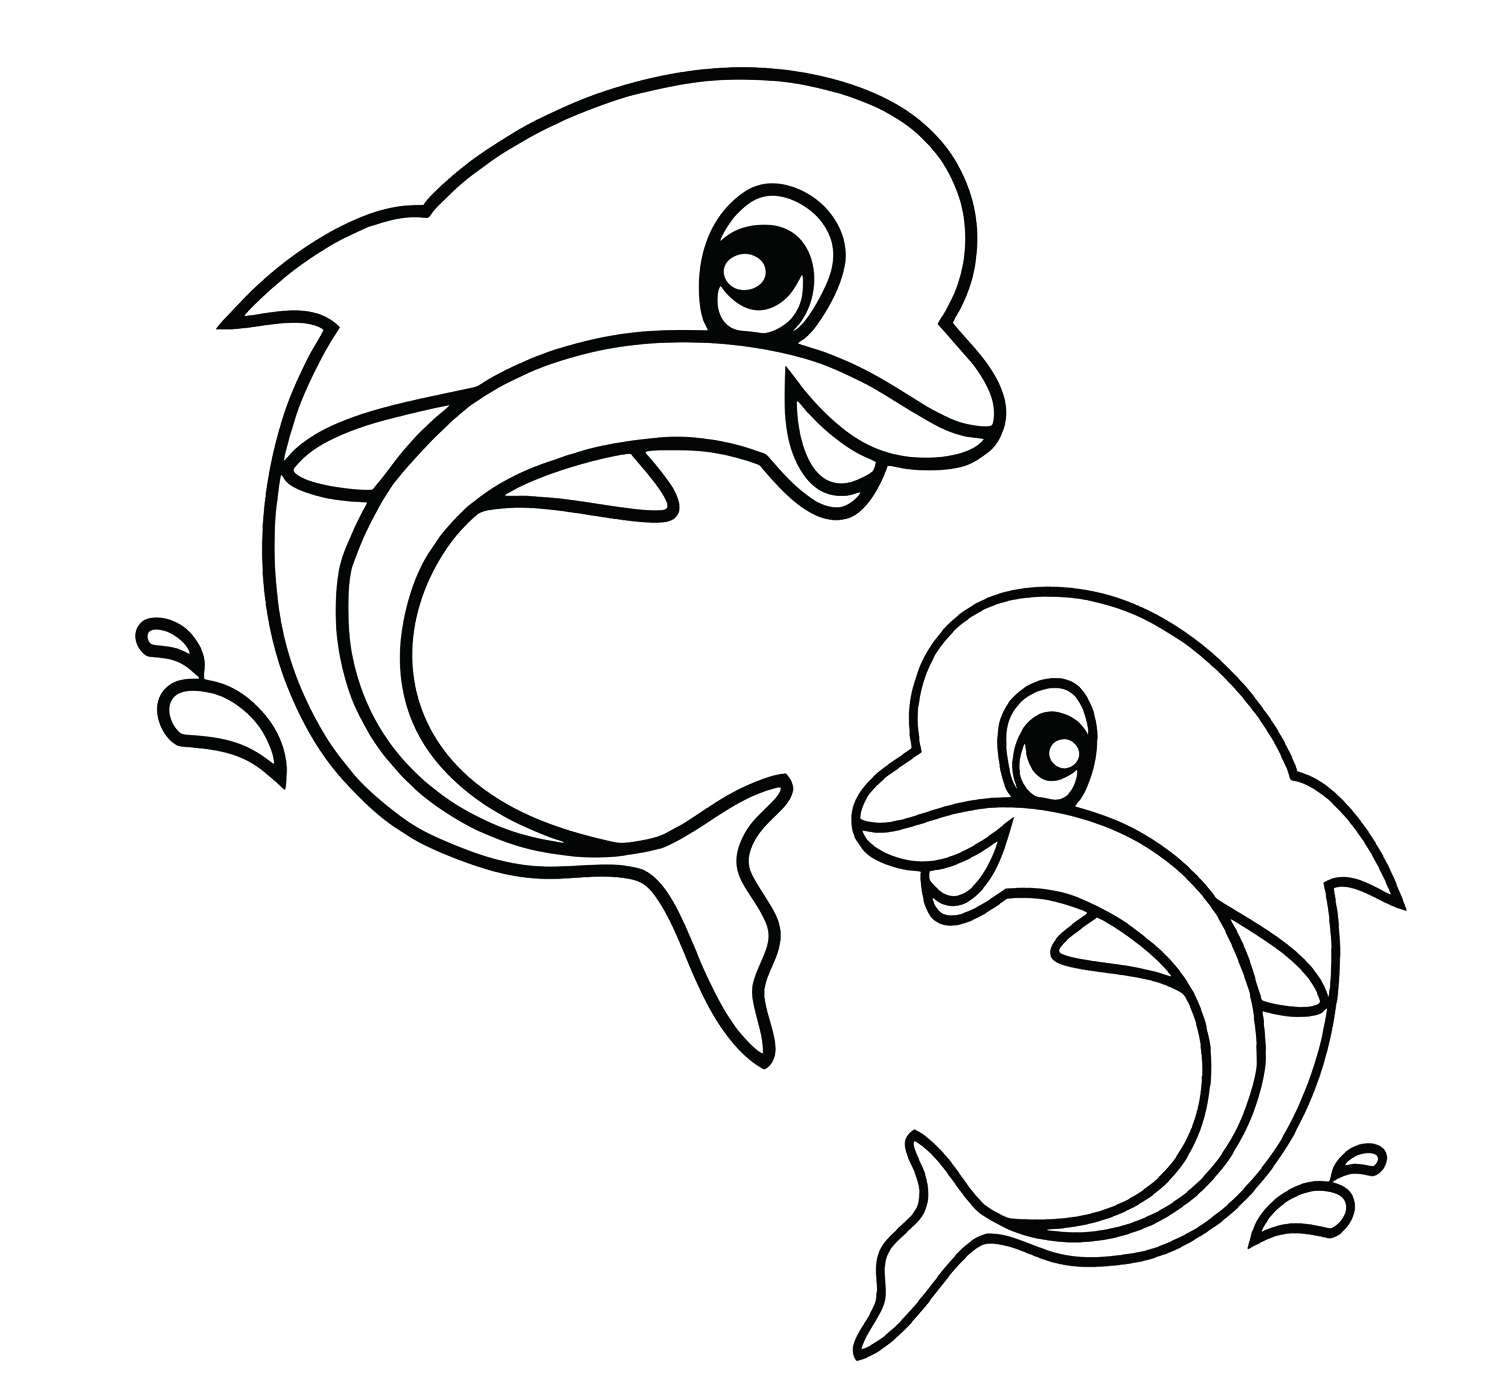 easy water animals drawing - Clip Art Library